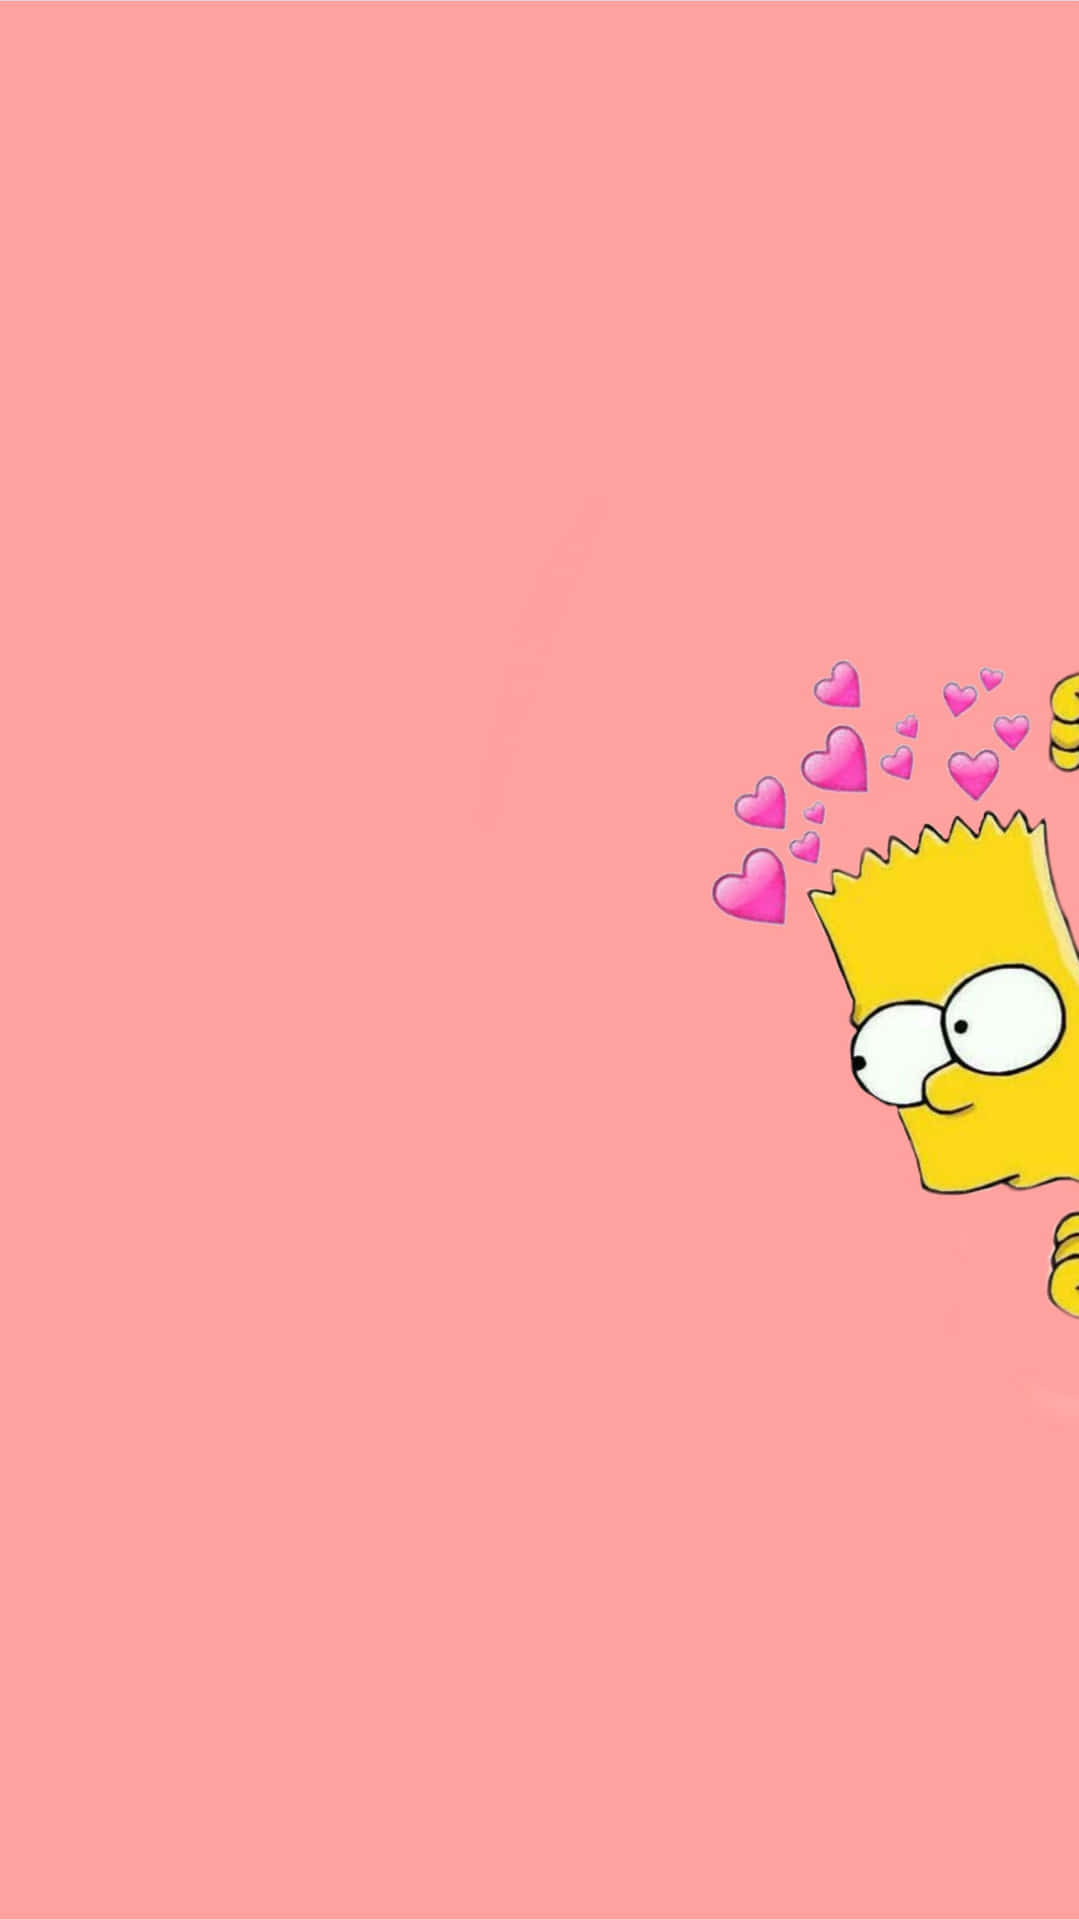 Add some fun to your home with the iconic Saturday Night Live character Bart Simpson. Wallpaper